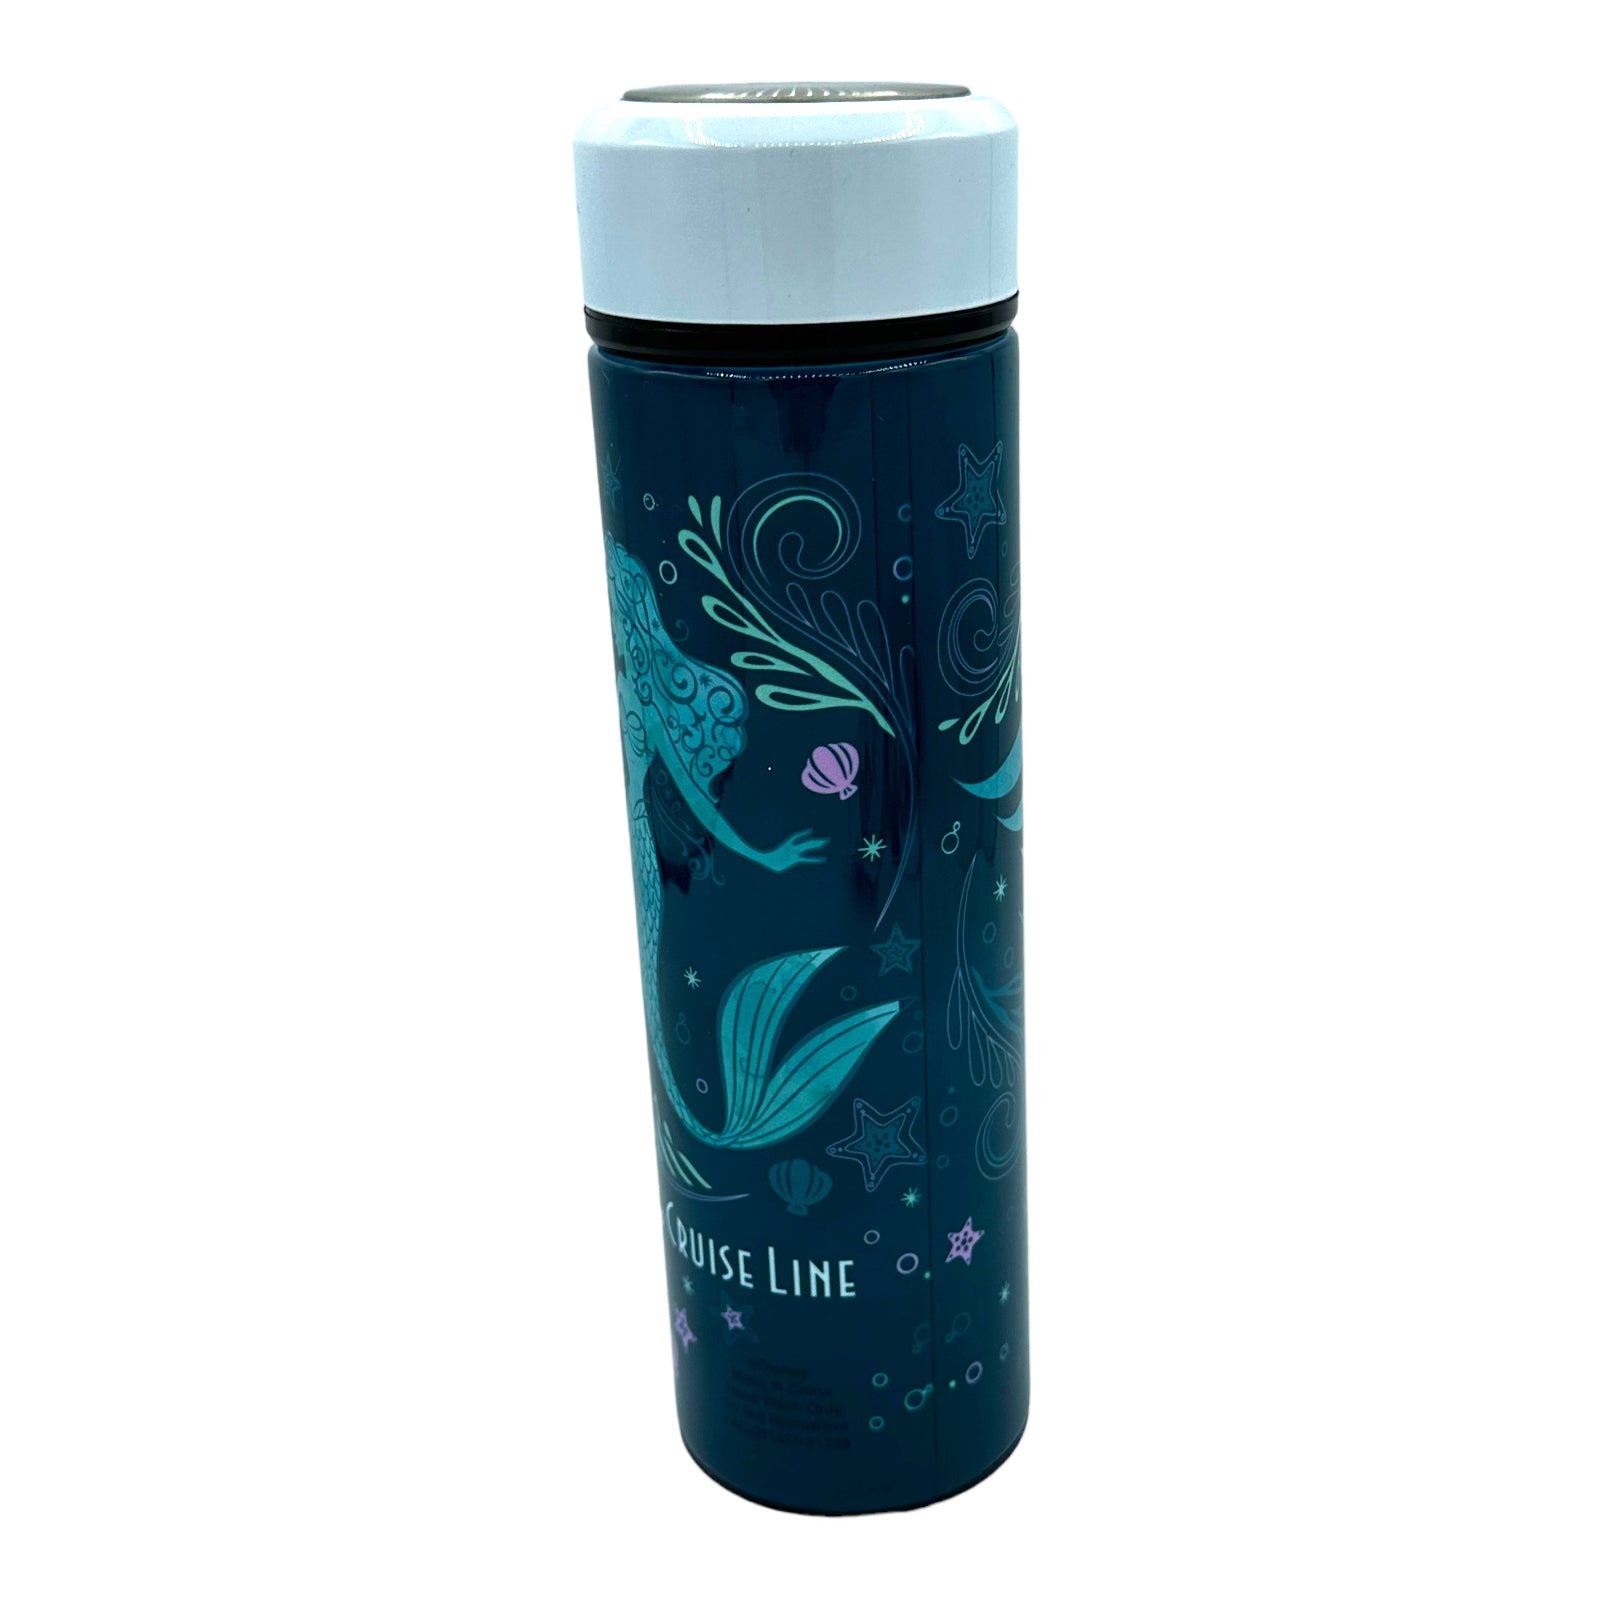 The Little Mermaid Stainless Steel Water Bottle with Built-In